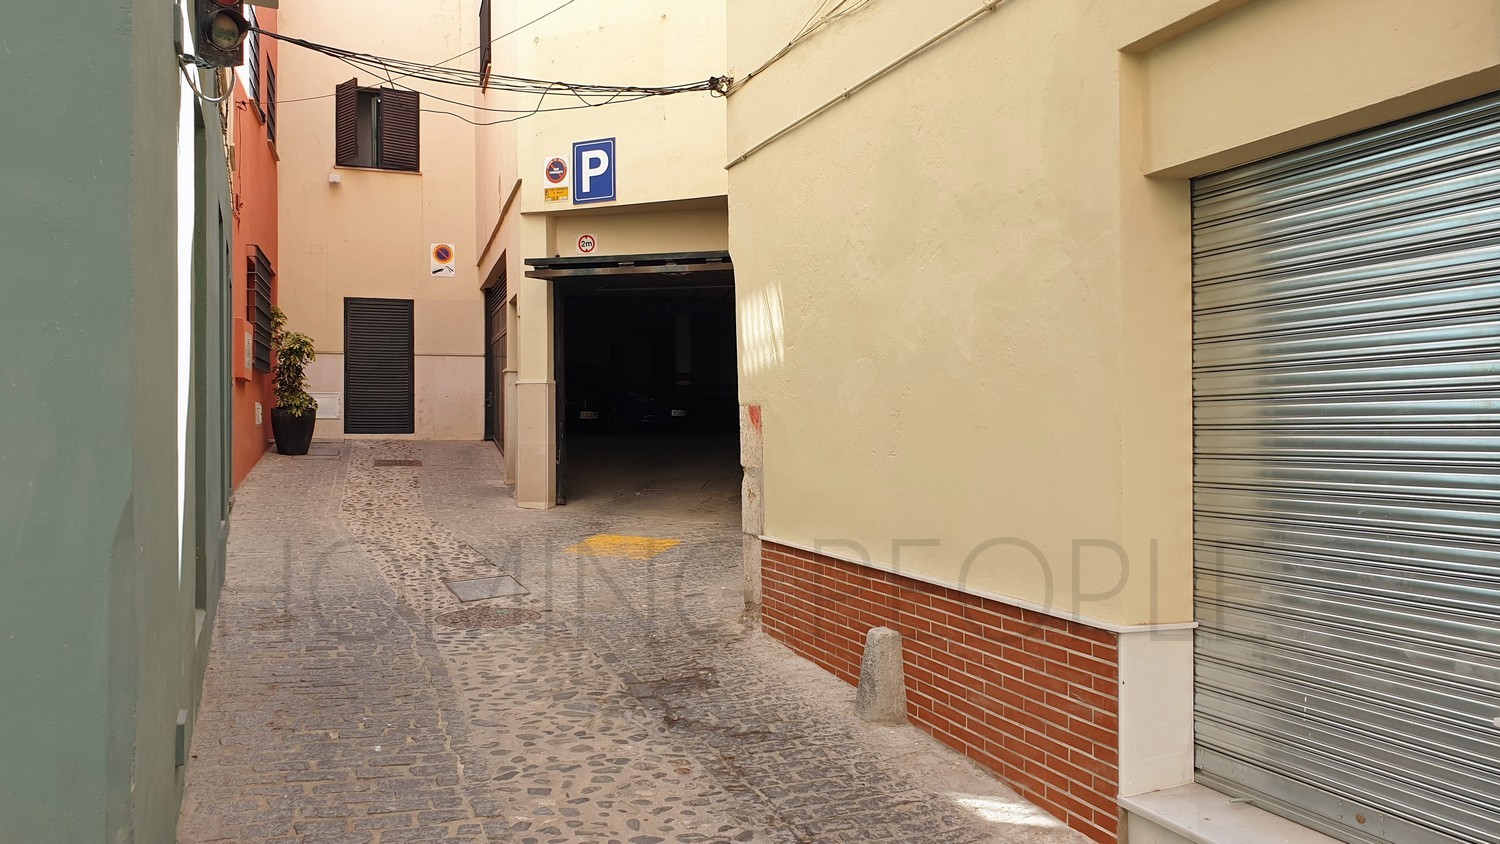 Retail space in the center of Malaga, two minutes' walk from Uncibay